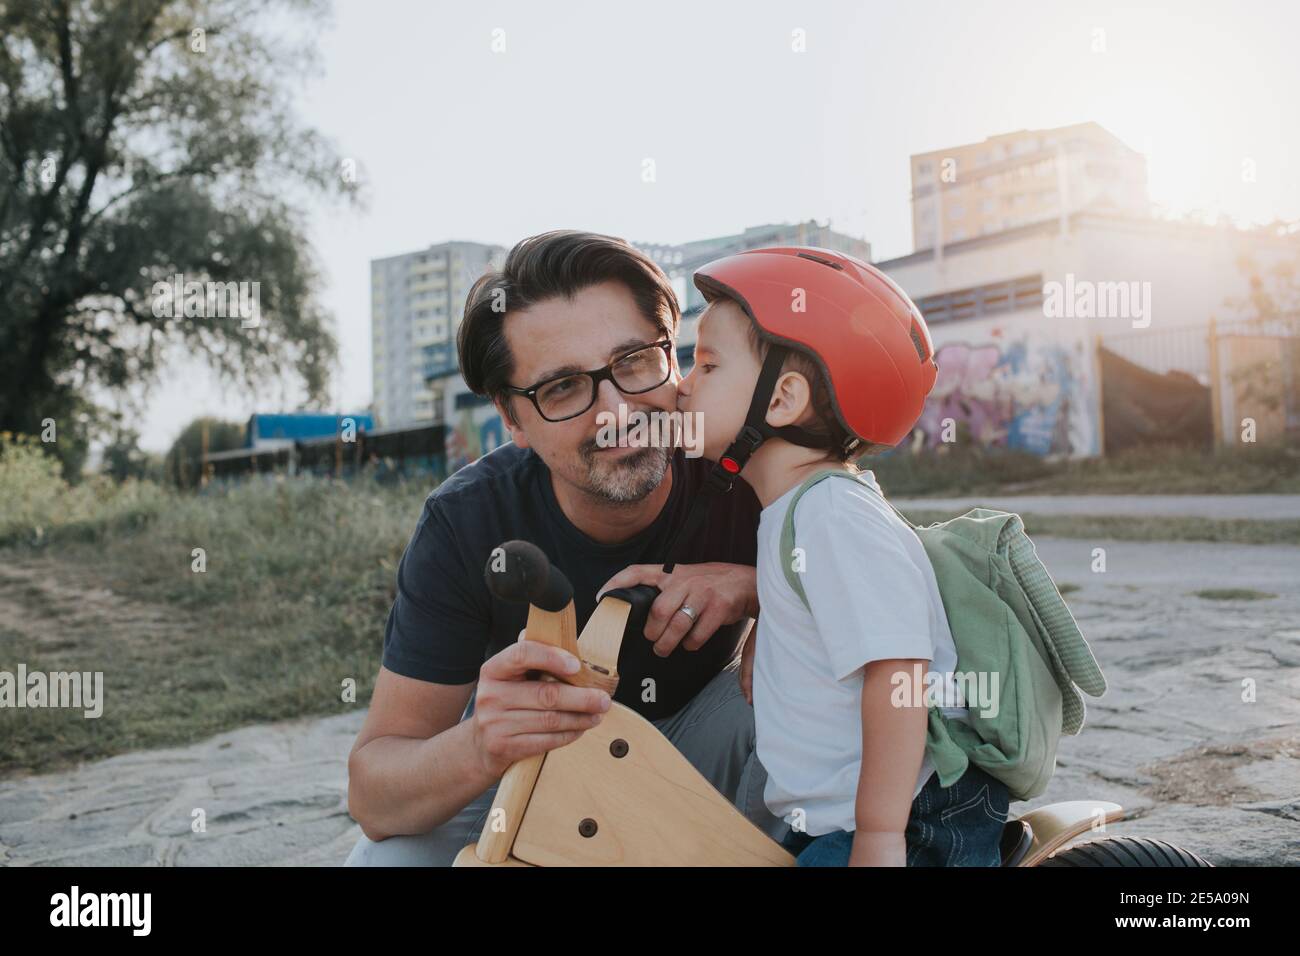 Smiling father getting a kiss from his young son on a bike. Little toddler boy wearing a helmet kissing his daddy during an evening walk. Stock Photo